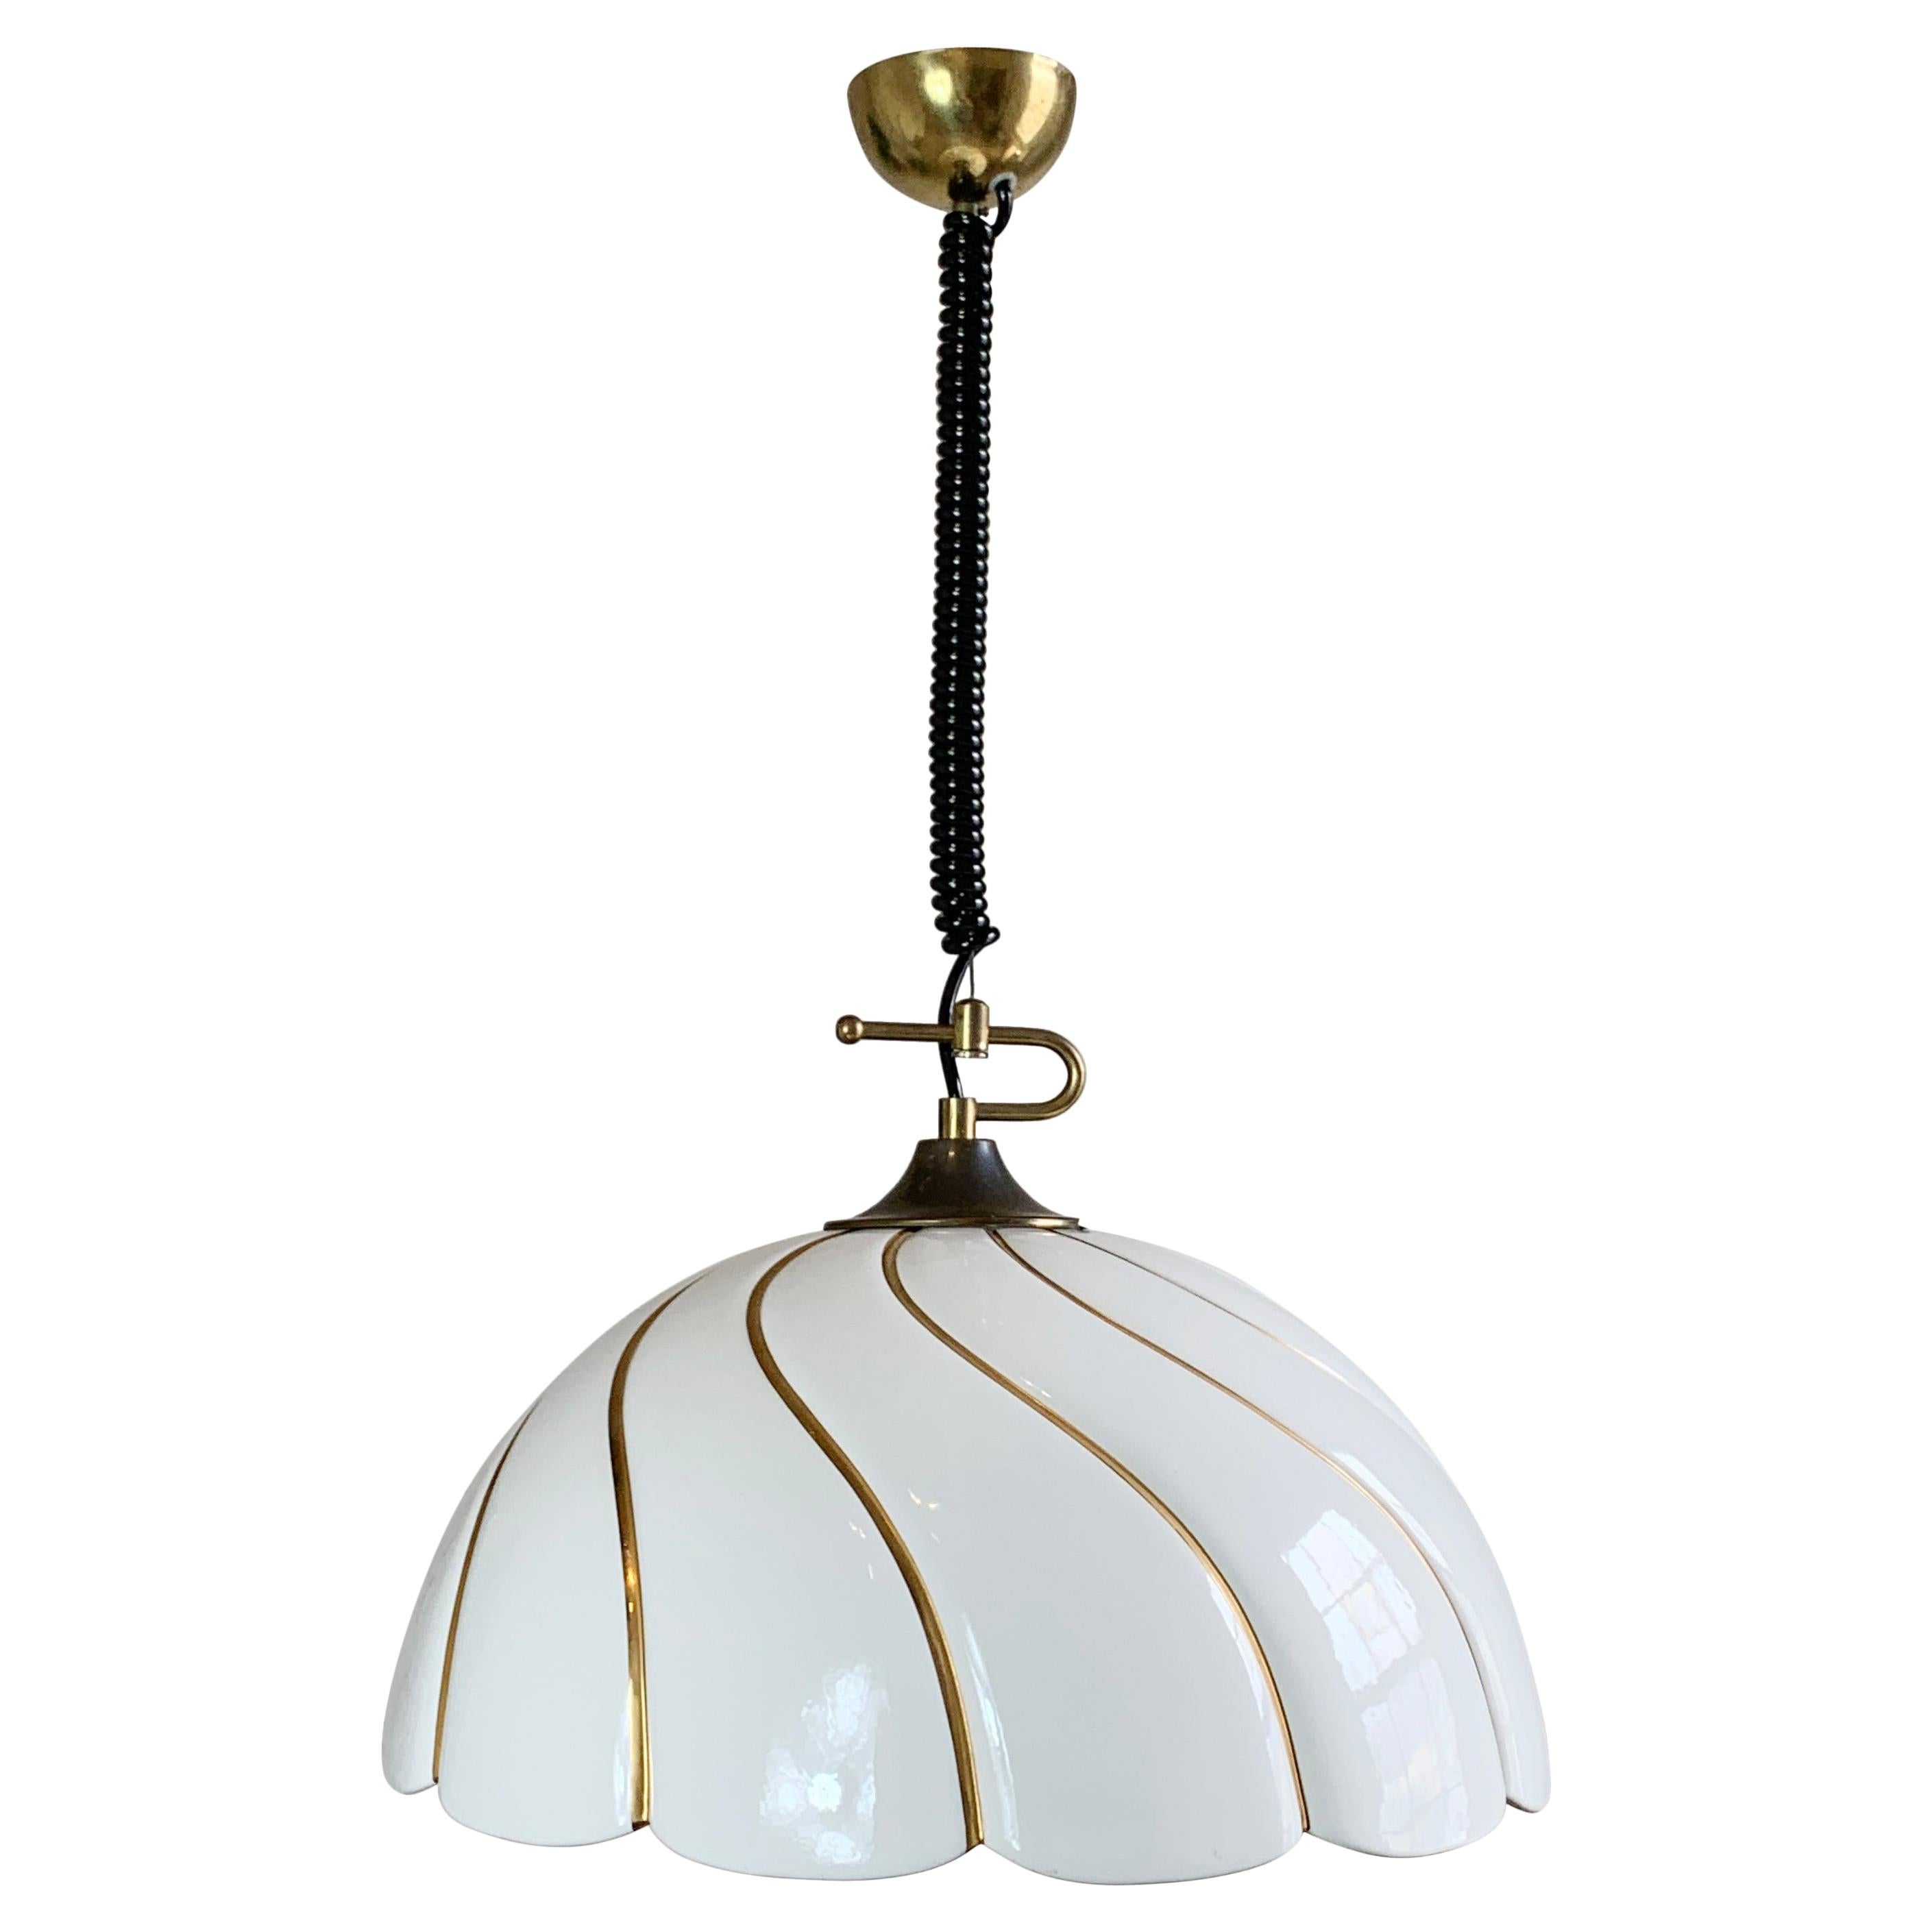 Tommaso Barbi Huge White and Gold Ceramic Lamp Shade For Sale